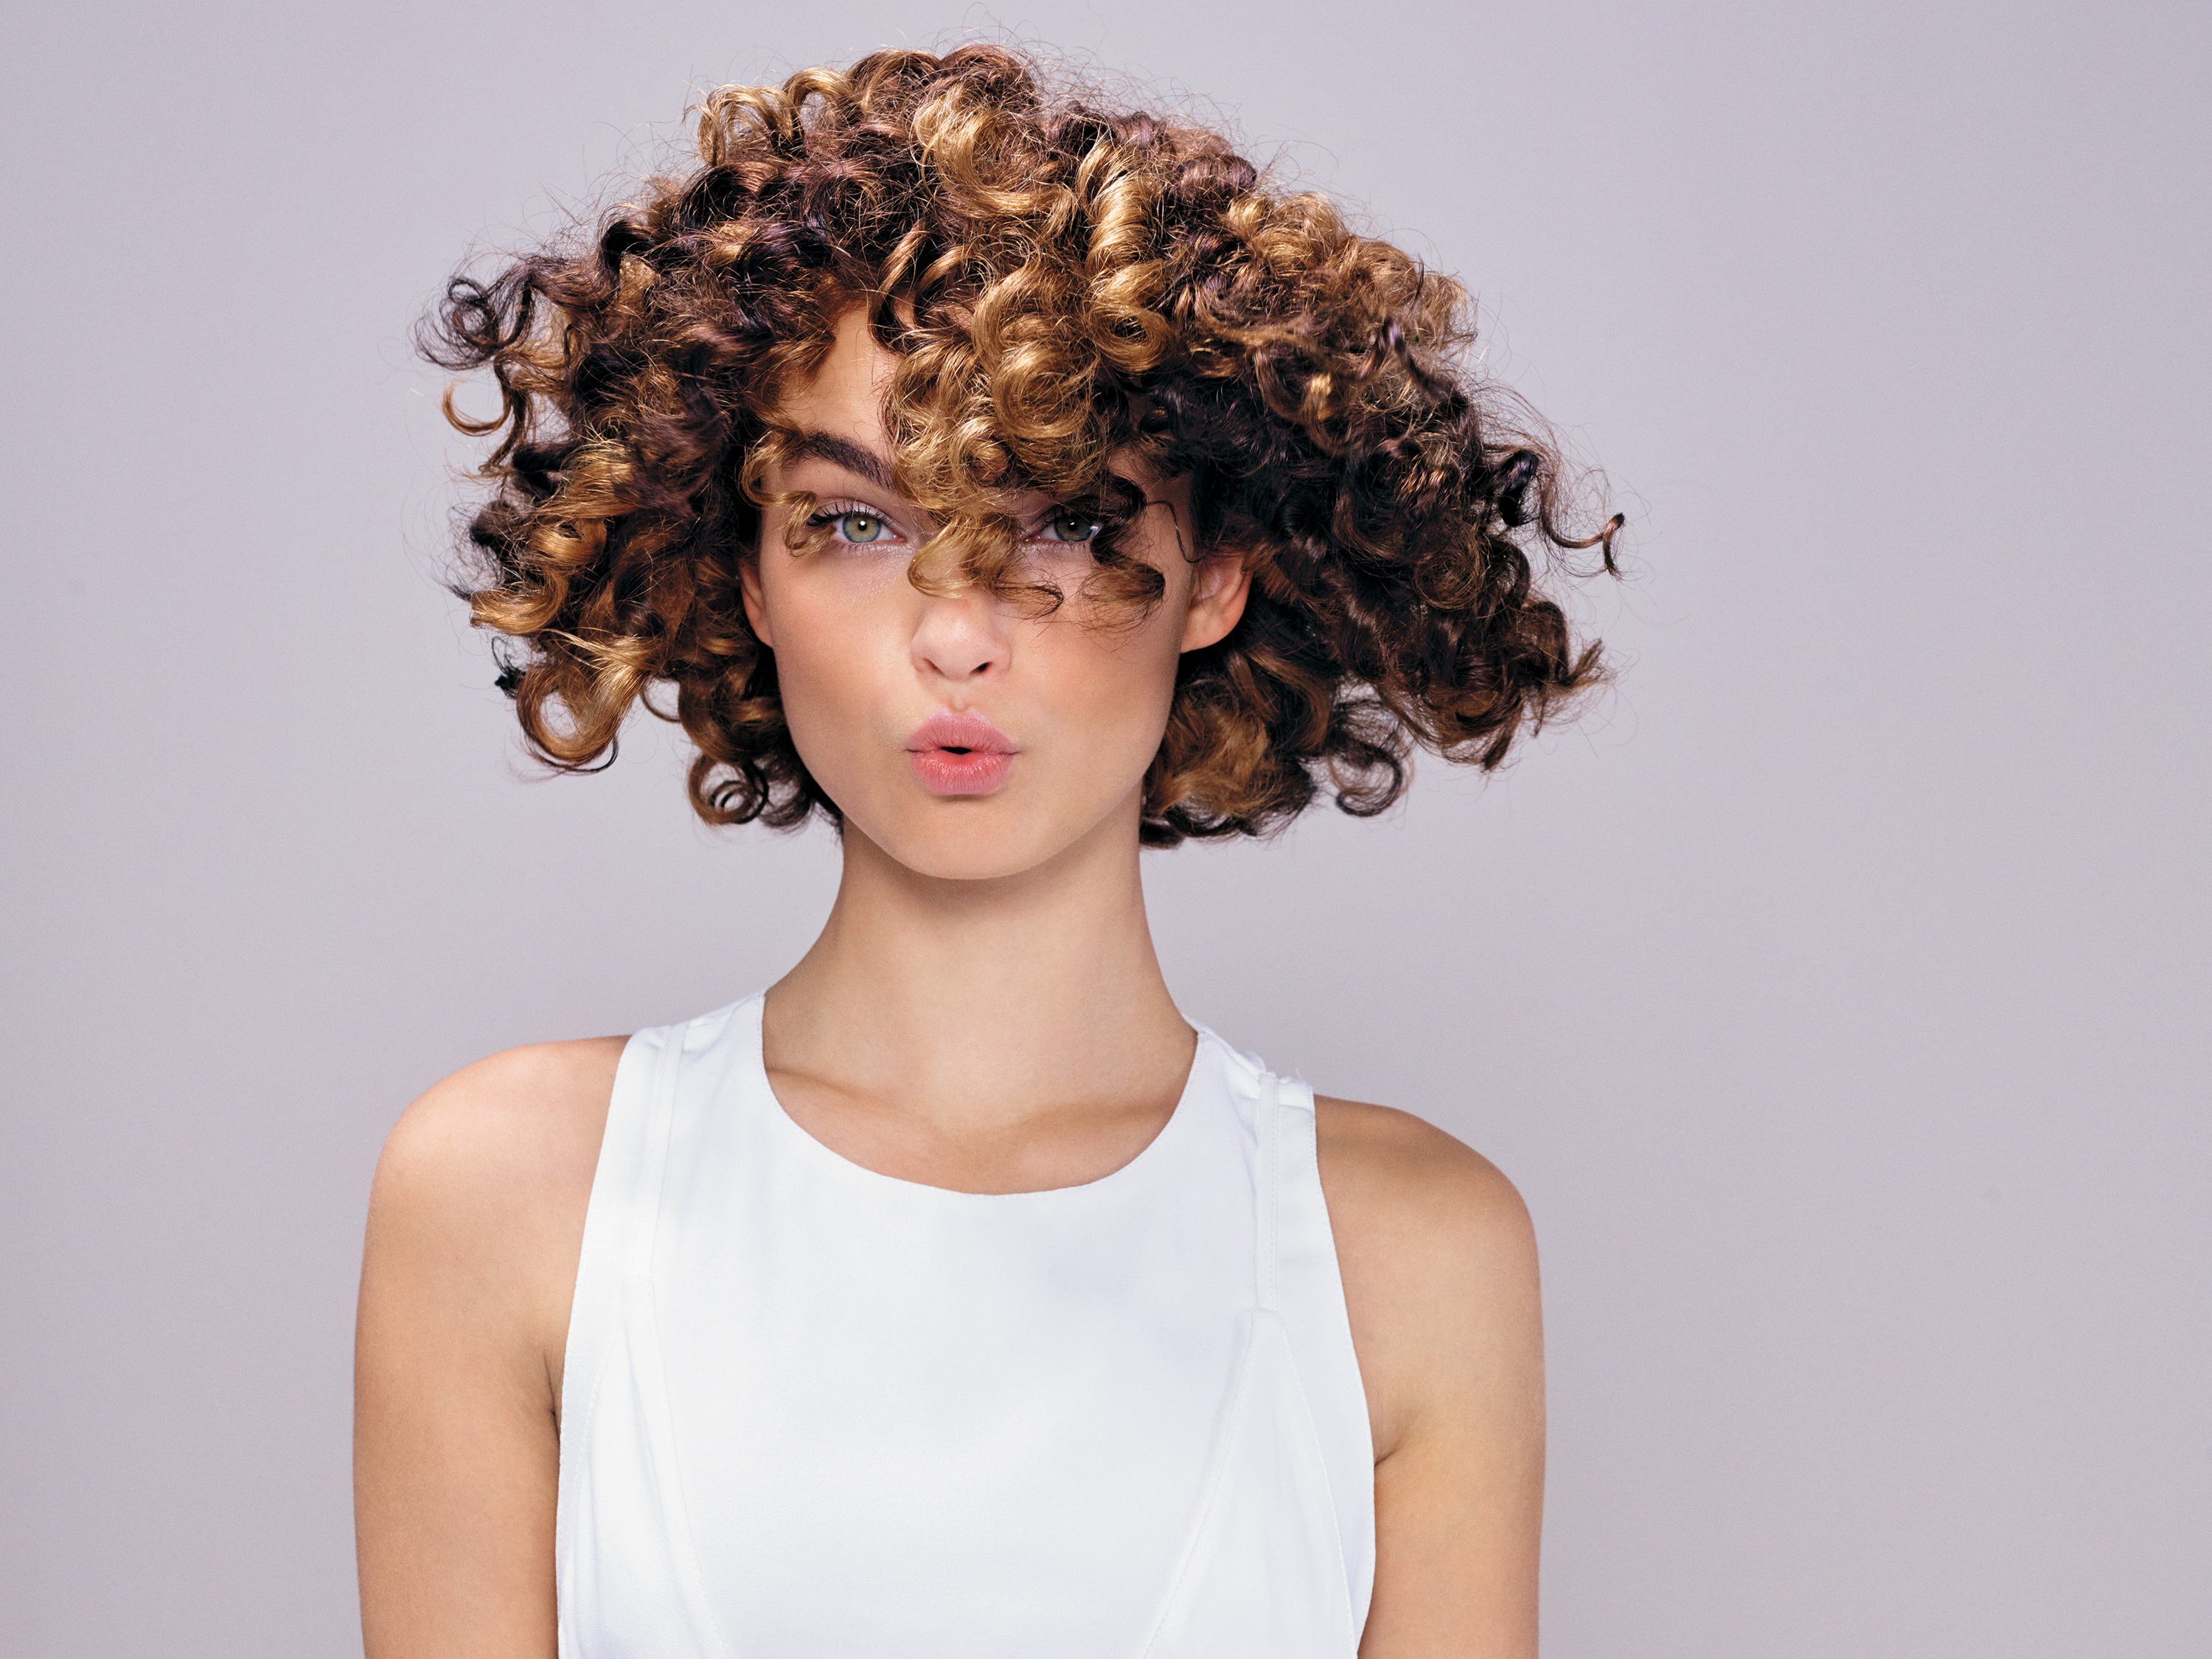 How-To Care for Curls